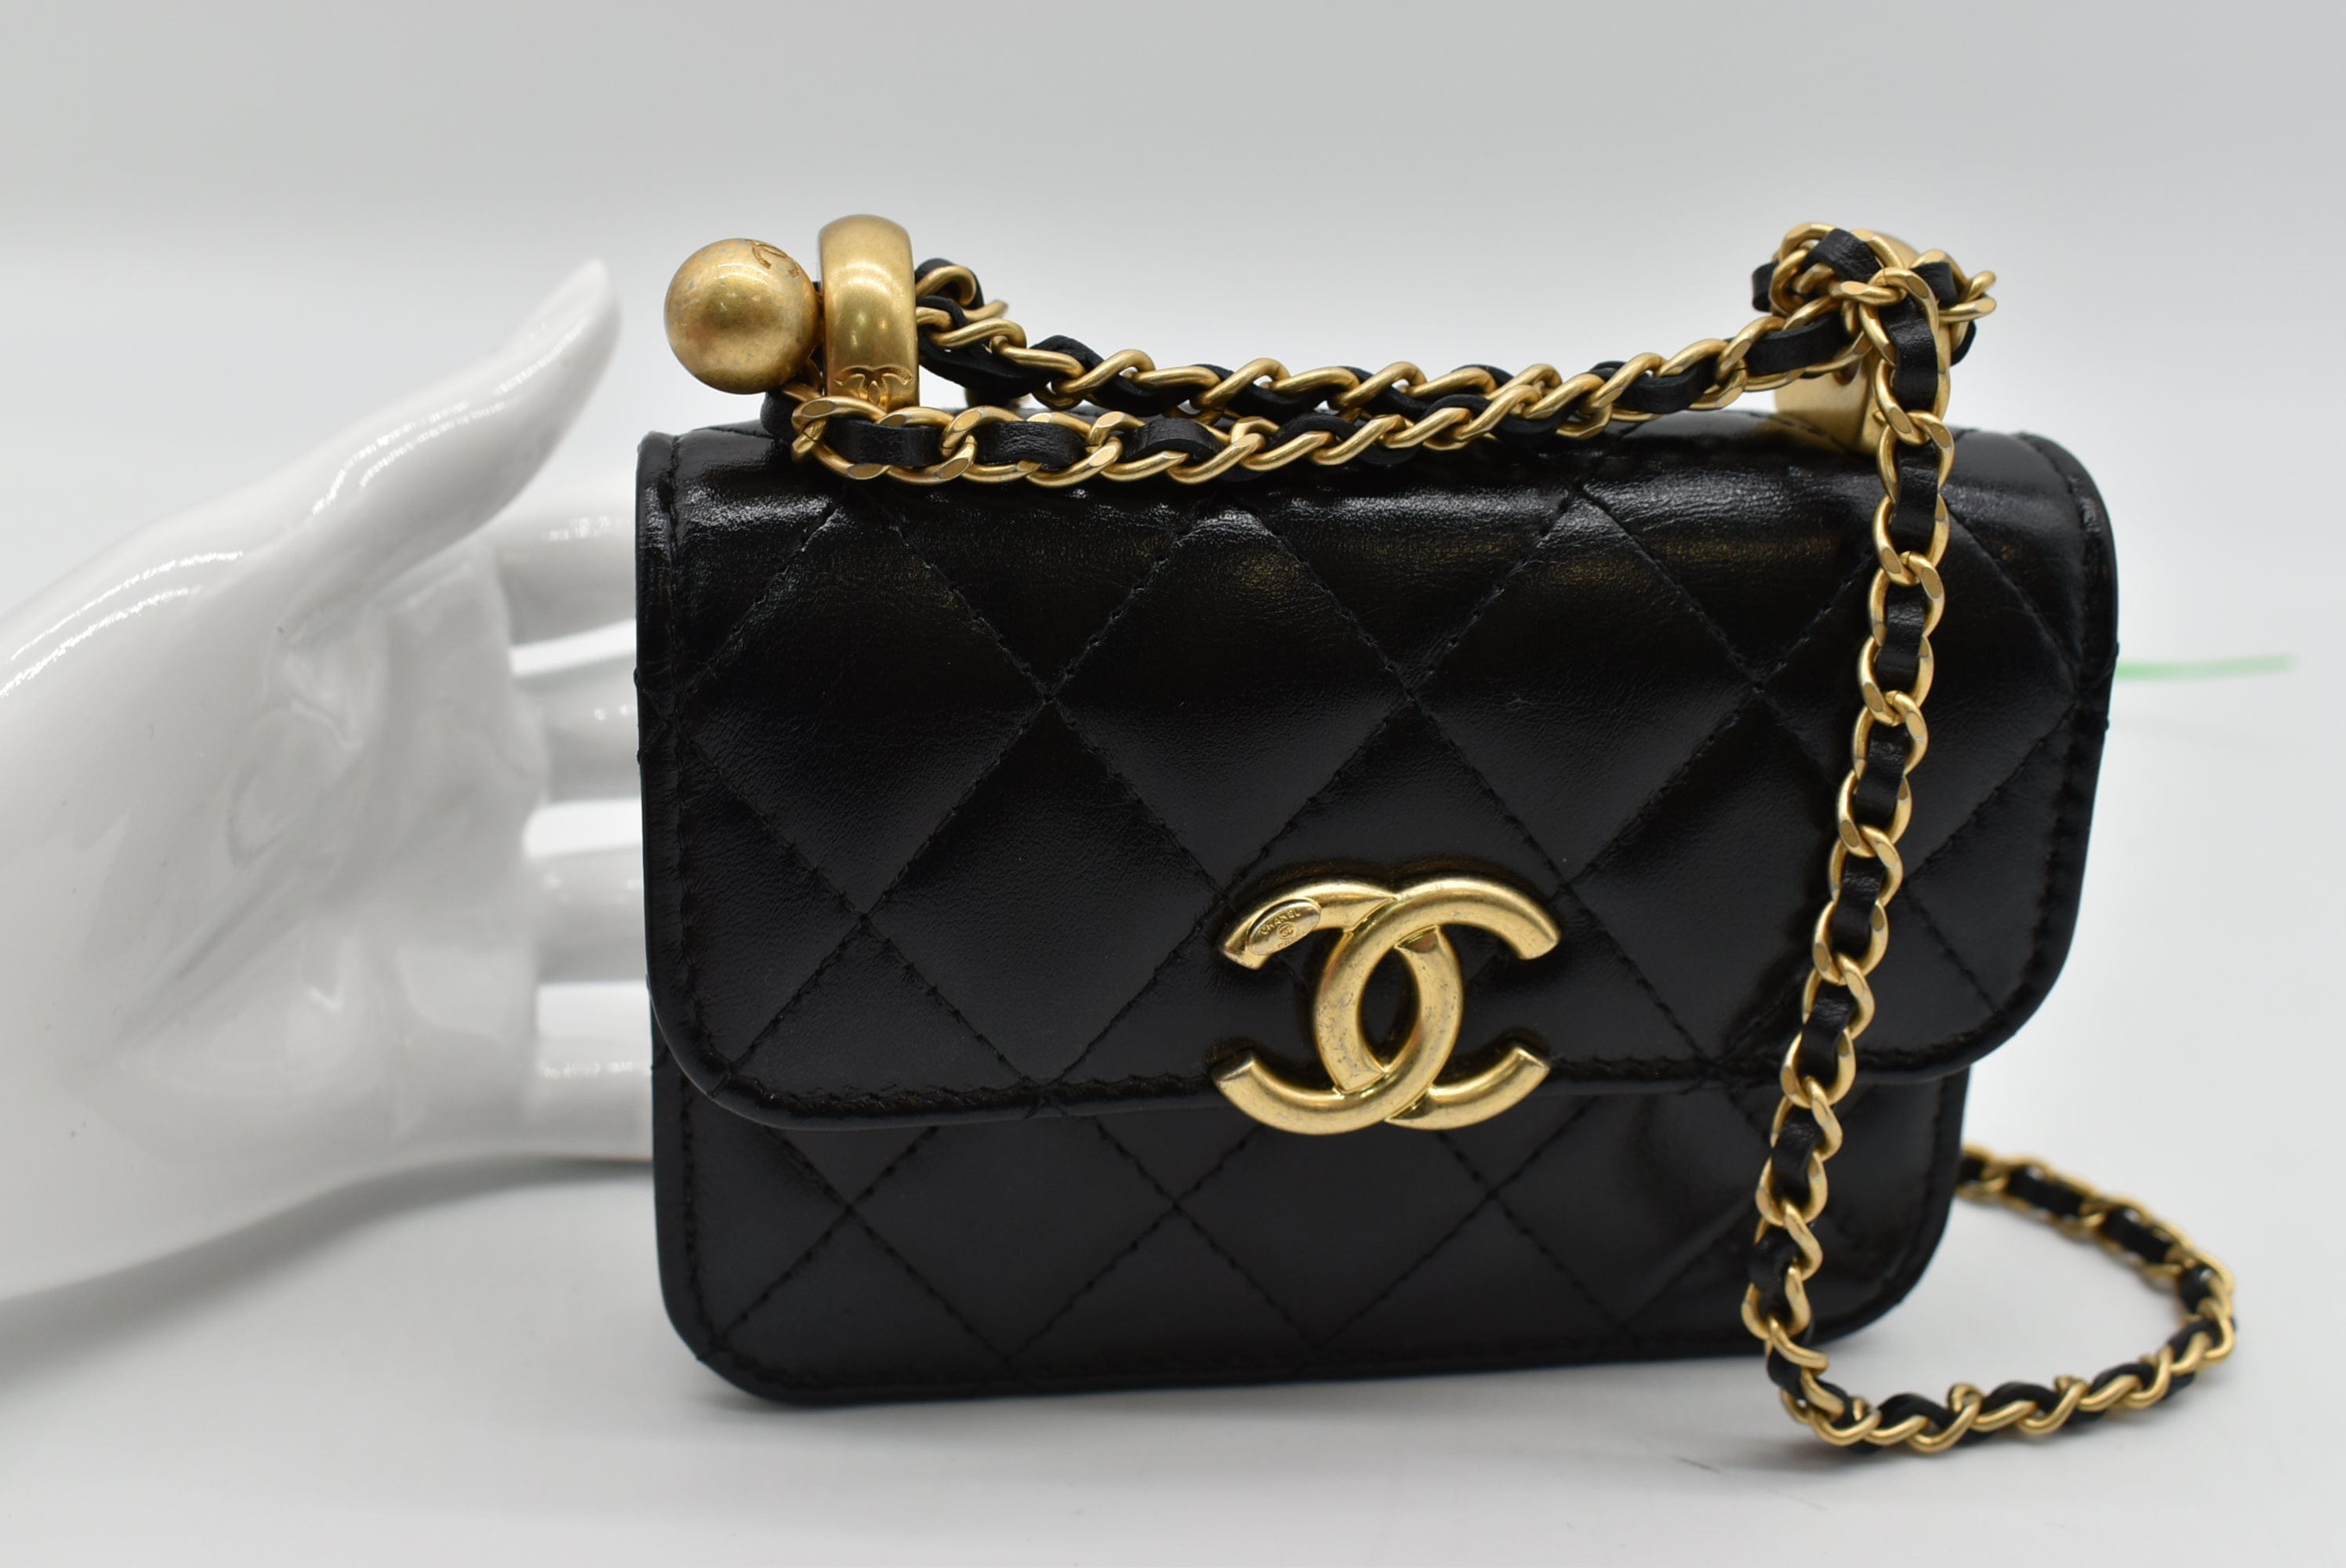 CHANEL, Bags, Chanel Coins Purse